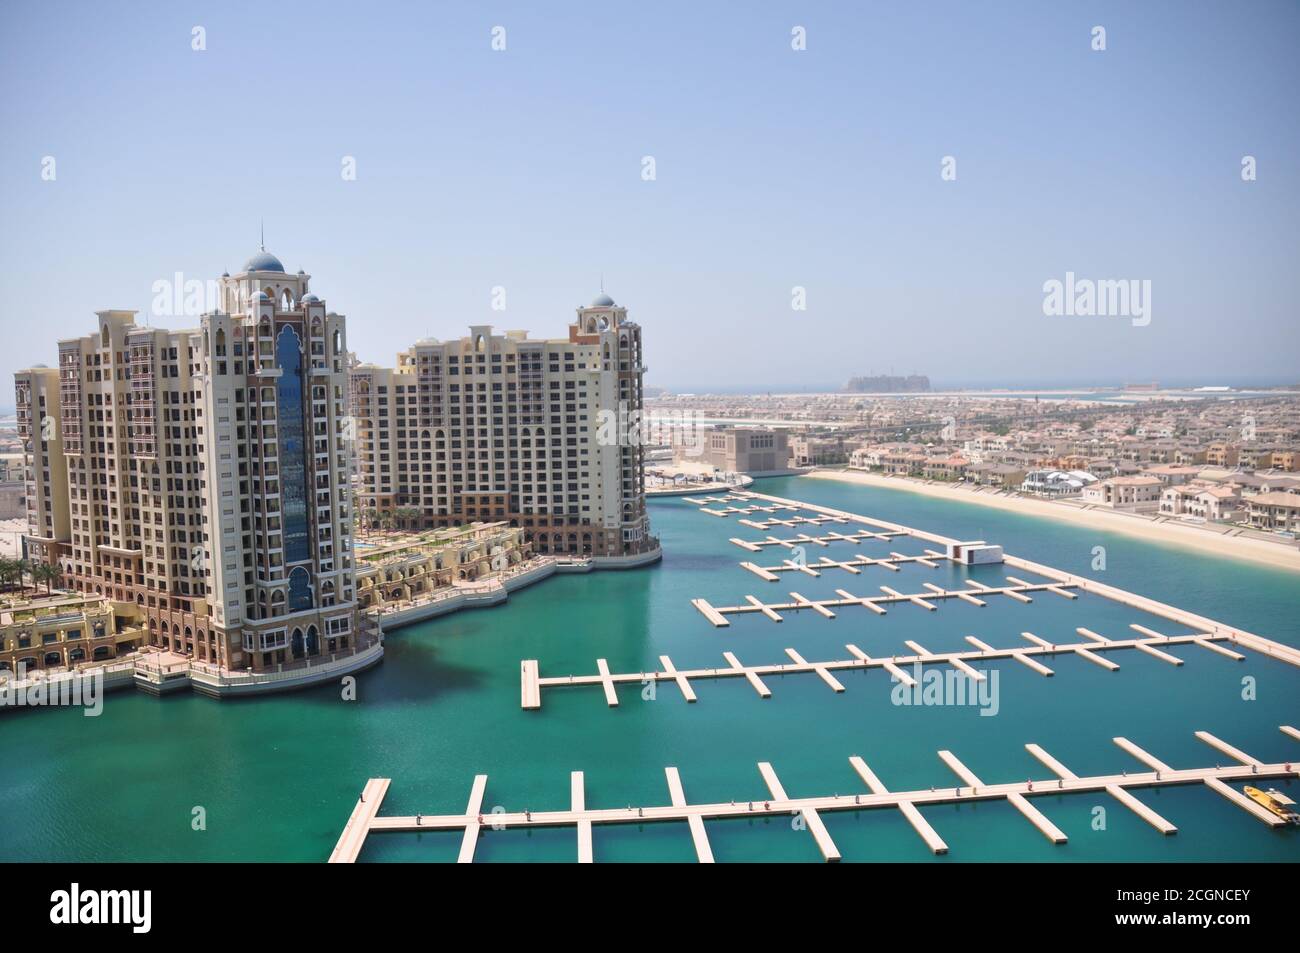 Buildings located on Palm Jumeirah, showing the views of the marine harbour, part of the Palm Islands Project built by Nakheel Property in Dubai, UAE. Stock Photo